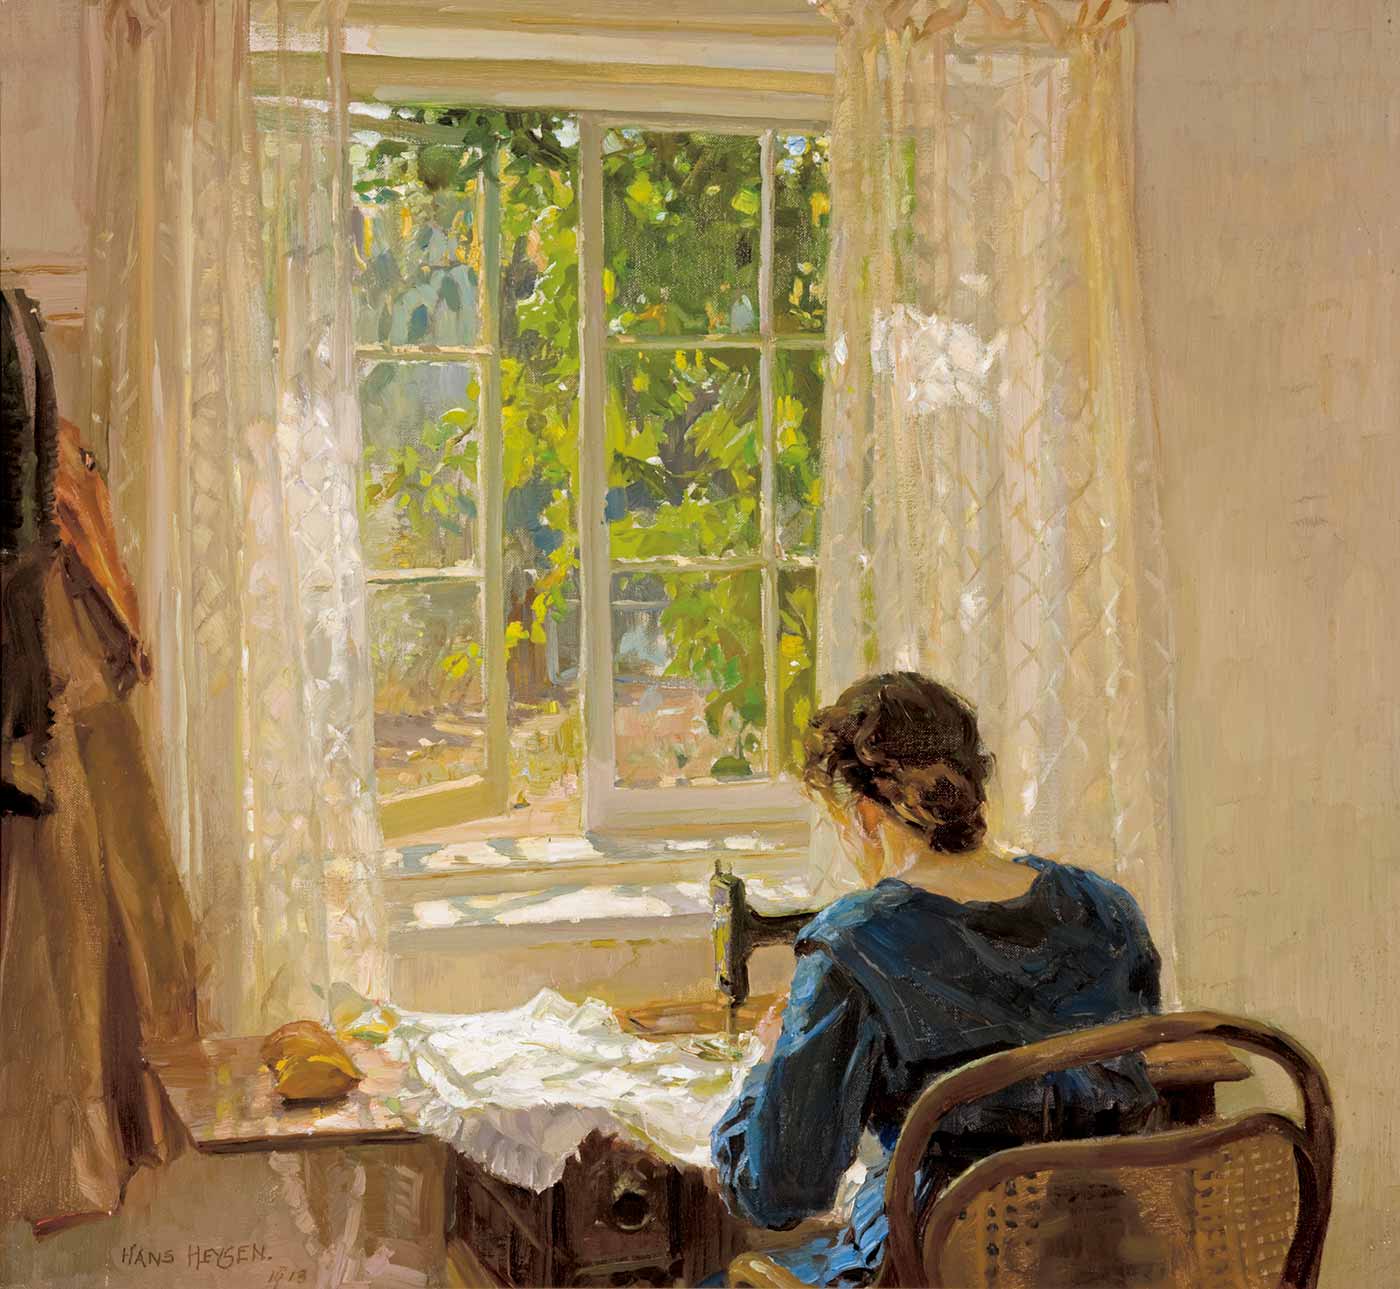 Oil painting showing back view of a woman in a blue dress, seated at a sewing machine, beside a window looking into a lush garden.